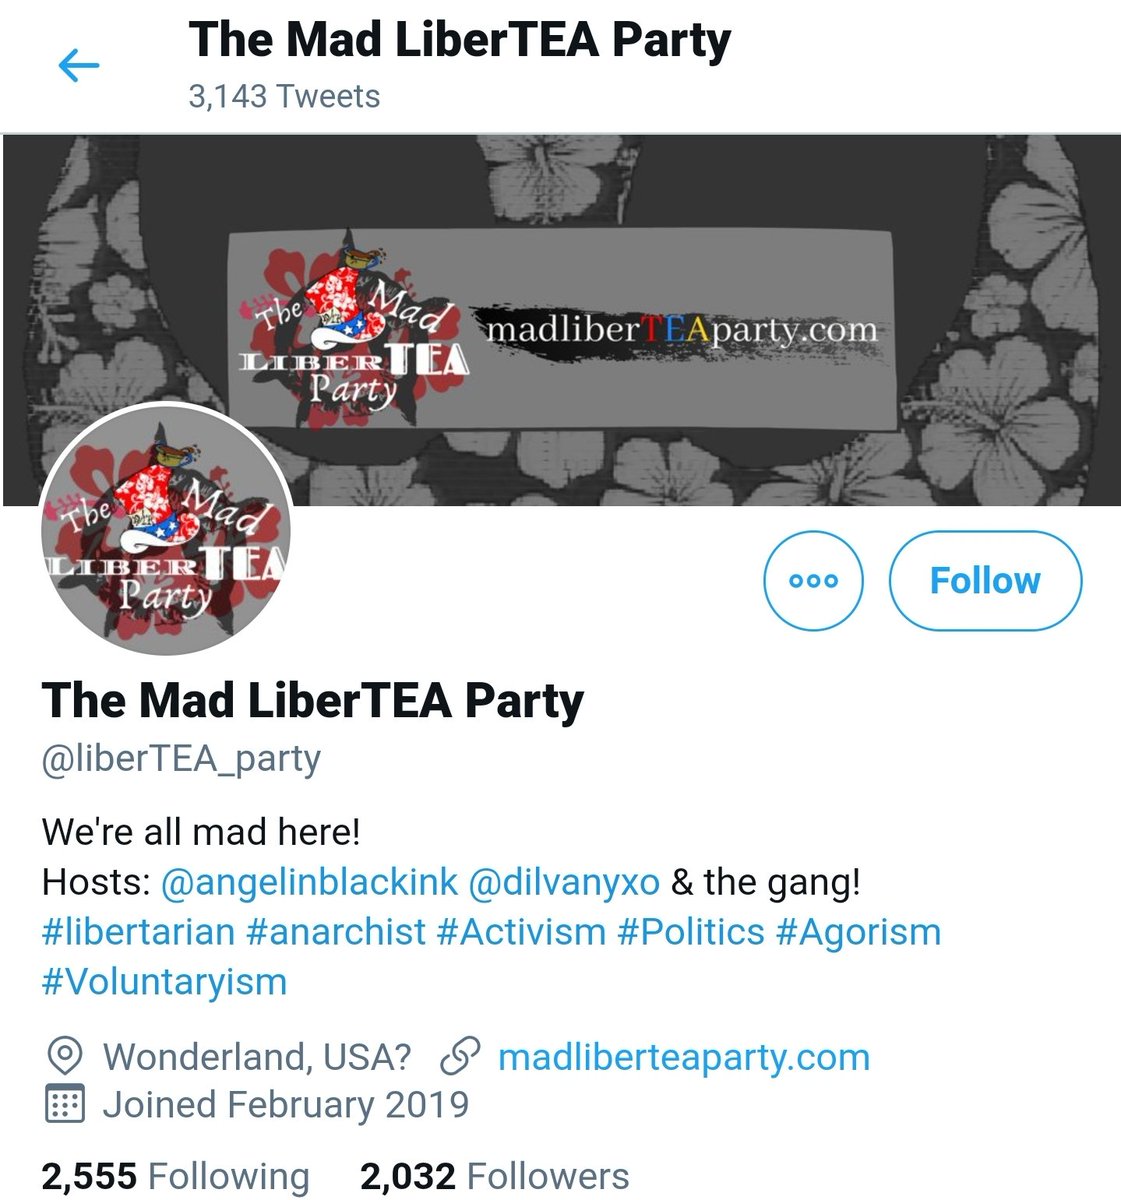 Here are some of the main accounts I have seen promoting this event. I never say this, but please share the thread so people can see what this event actually is. If I find any other relevant information I'll add to this.